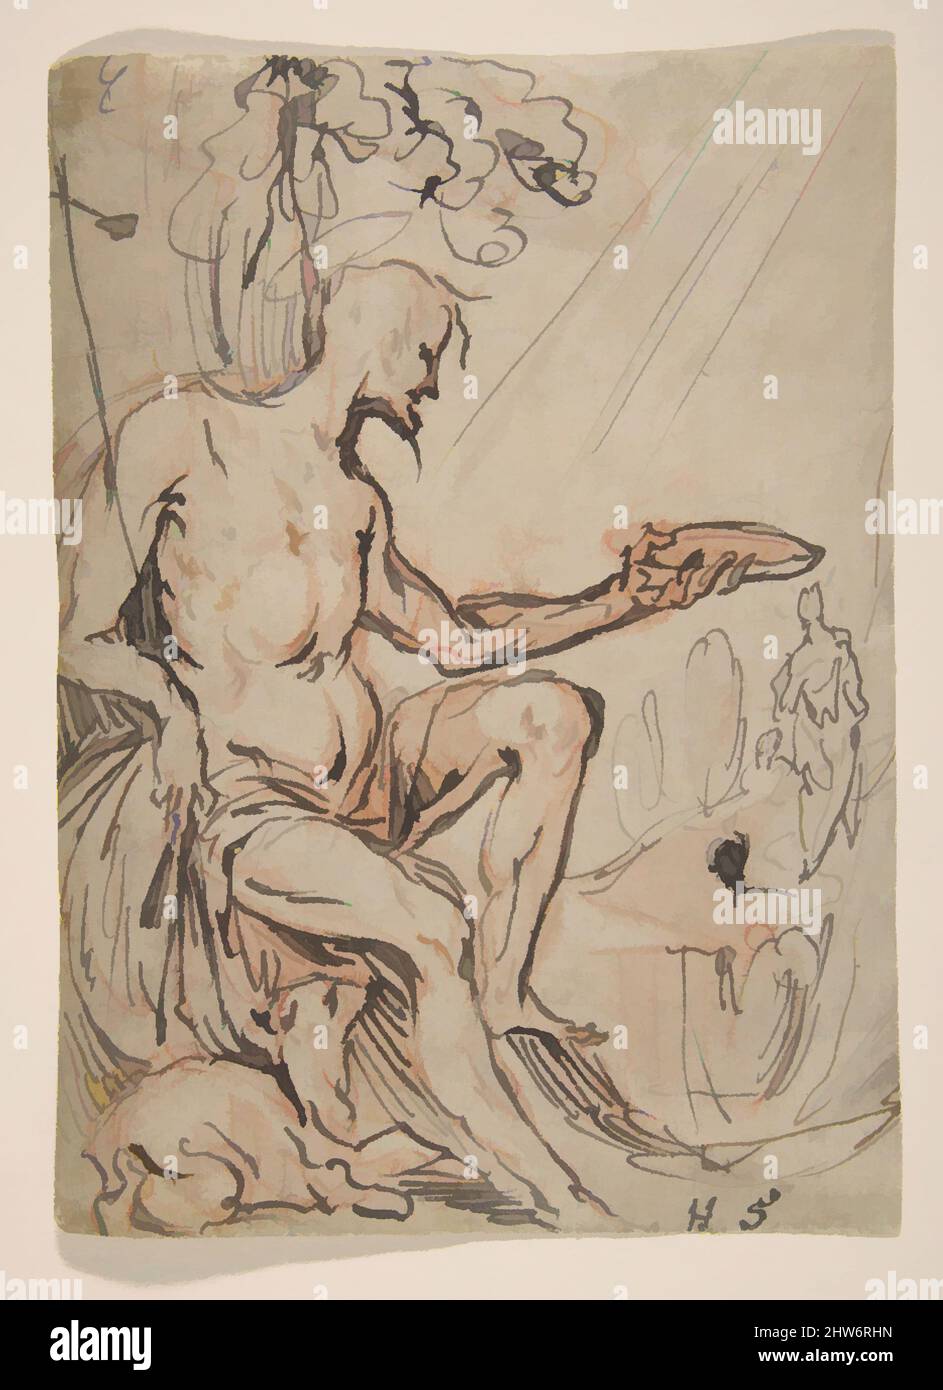 Art inspired by Saint John the Baptist in a Landscape, 1600–1625, Pen and brown ink, over a sketch in red chalk., sheet: 7 5/16 x 5 3/16 in. (18.5 x 13.2 cm), Drawings, Hans Stutte (German, active Lübeck, died before 1625, Classic works modernized by Artotop with a splash of modernity. Shapes, color and value, eye-catching visual impact on art. Emotions through freedom of artworks in a contemporary way. A timeless message pursuing a wildly creative new direction. Artists turning to the digital medium and creating the Artotop NFT Stock Photo